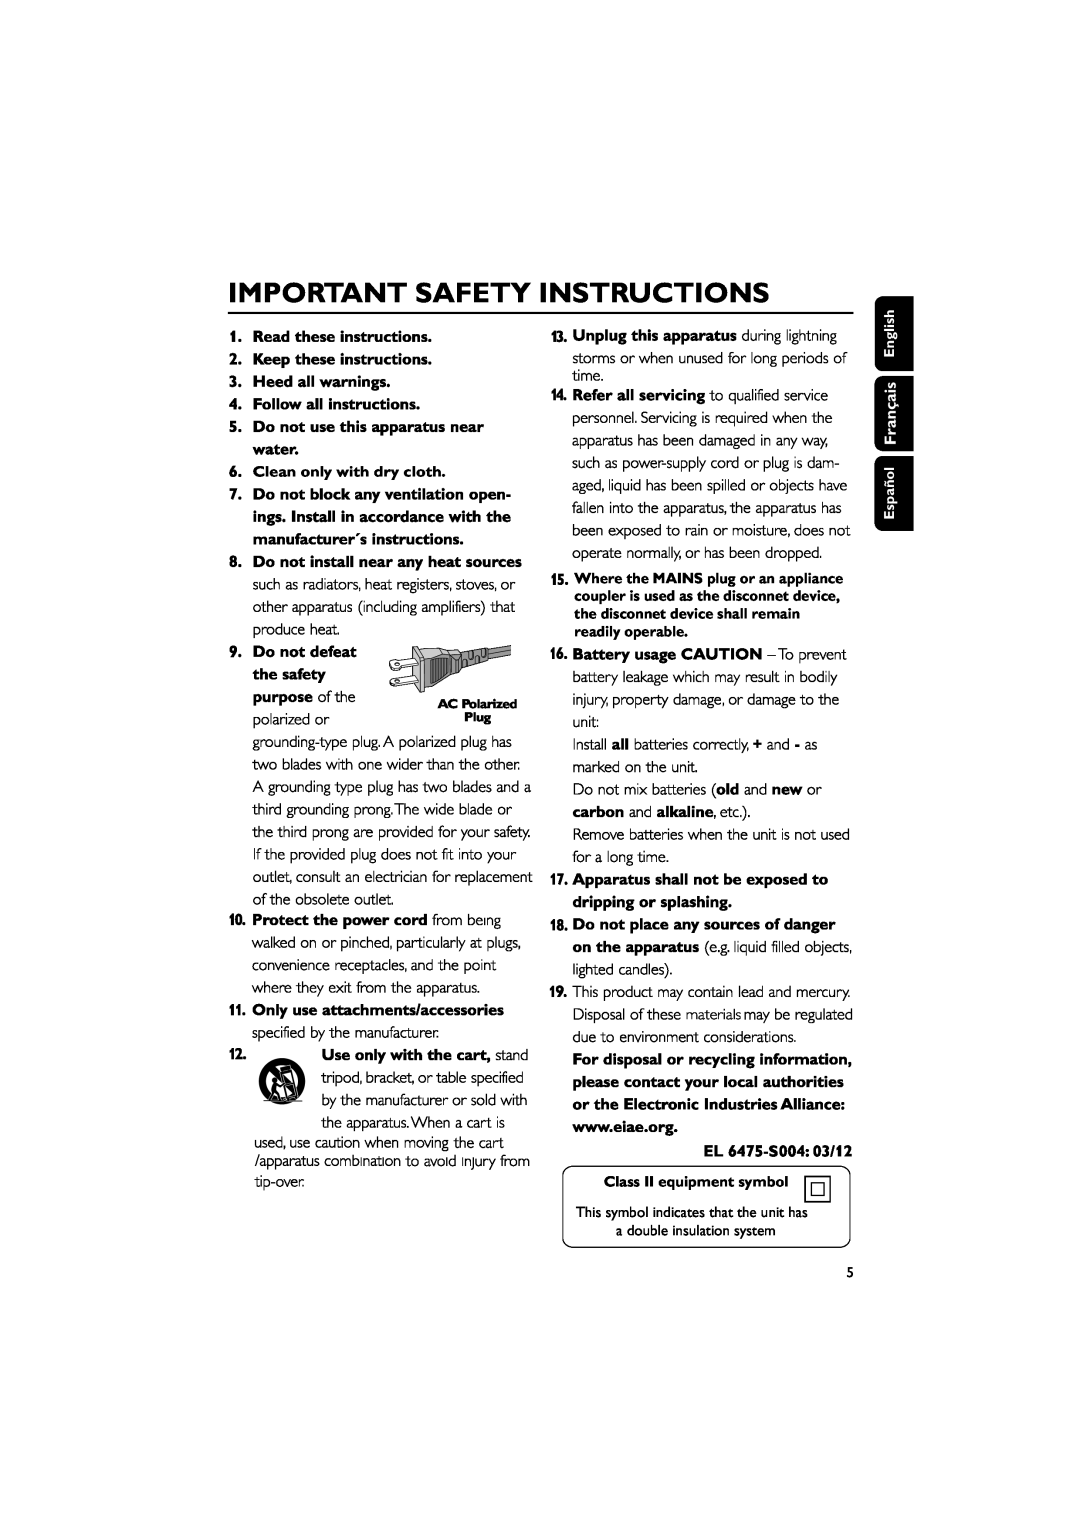 Philips FWM143/37 quick start Important Safety Instructions, rançaisF, Clean only with dry cloth, Class II equipment symbol 